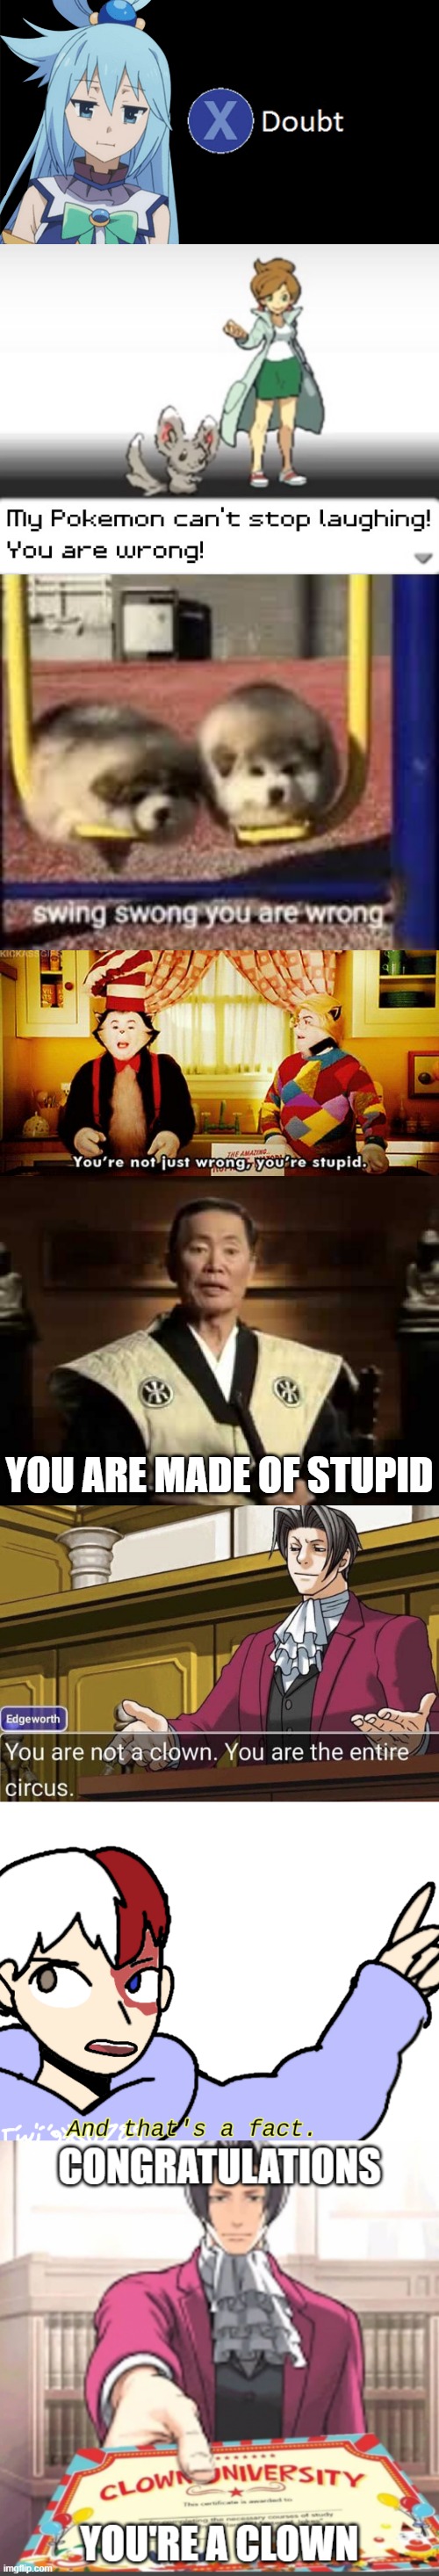 YOU ARE MADE OF STUPID | image tagged in aqua x to doubt,my pokemon can't stop laughing you are wrong,swing swong,you're not just wrong you're stupid | made w/ Imgflip meme maker